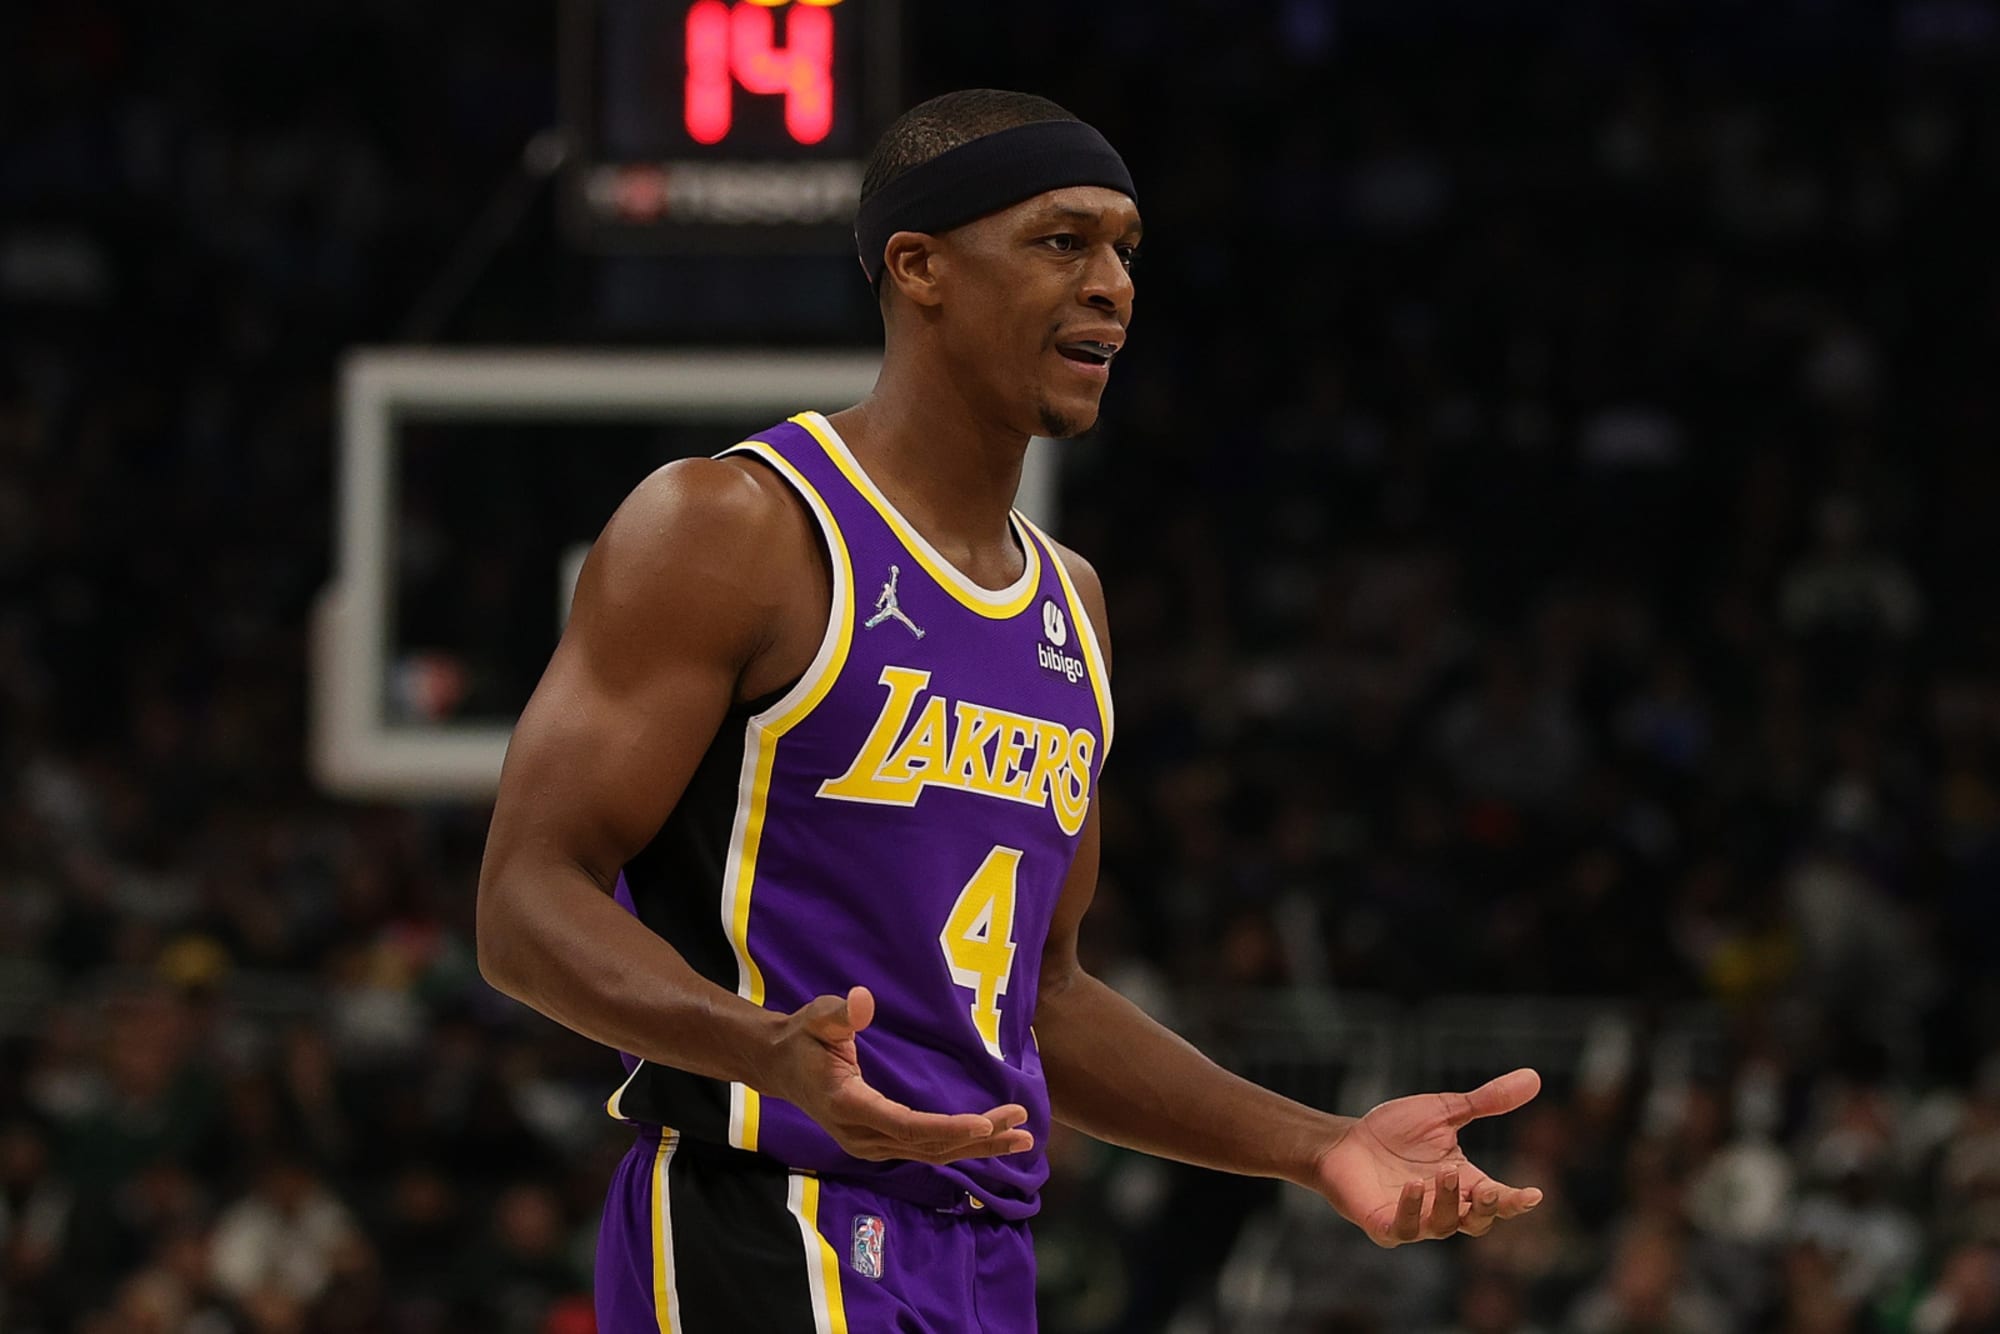 If Rajon Rondo ends up in Cleveland, who would you like to see in Lakers  jersey in return? 🤔 #NBA #Lakers #RajonRondo